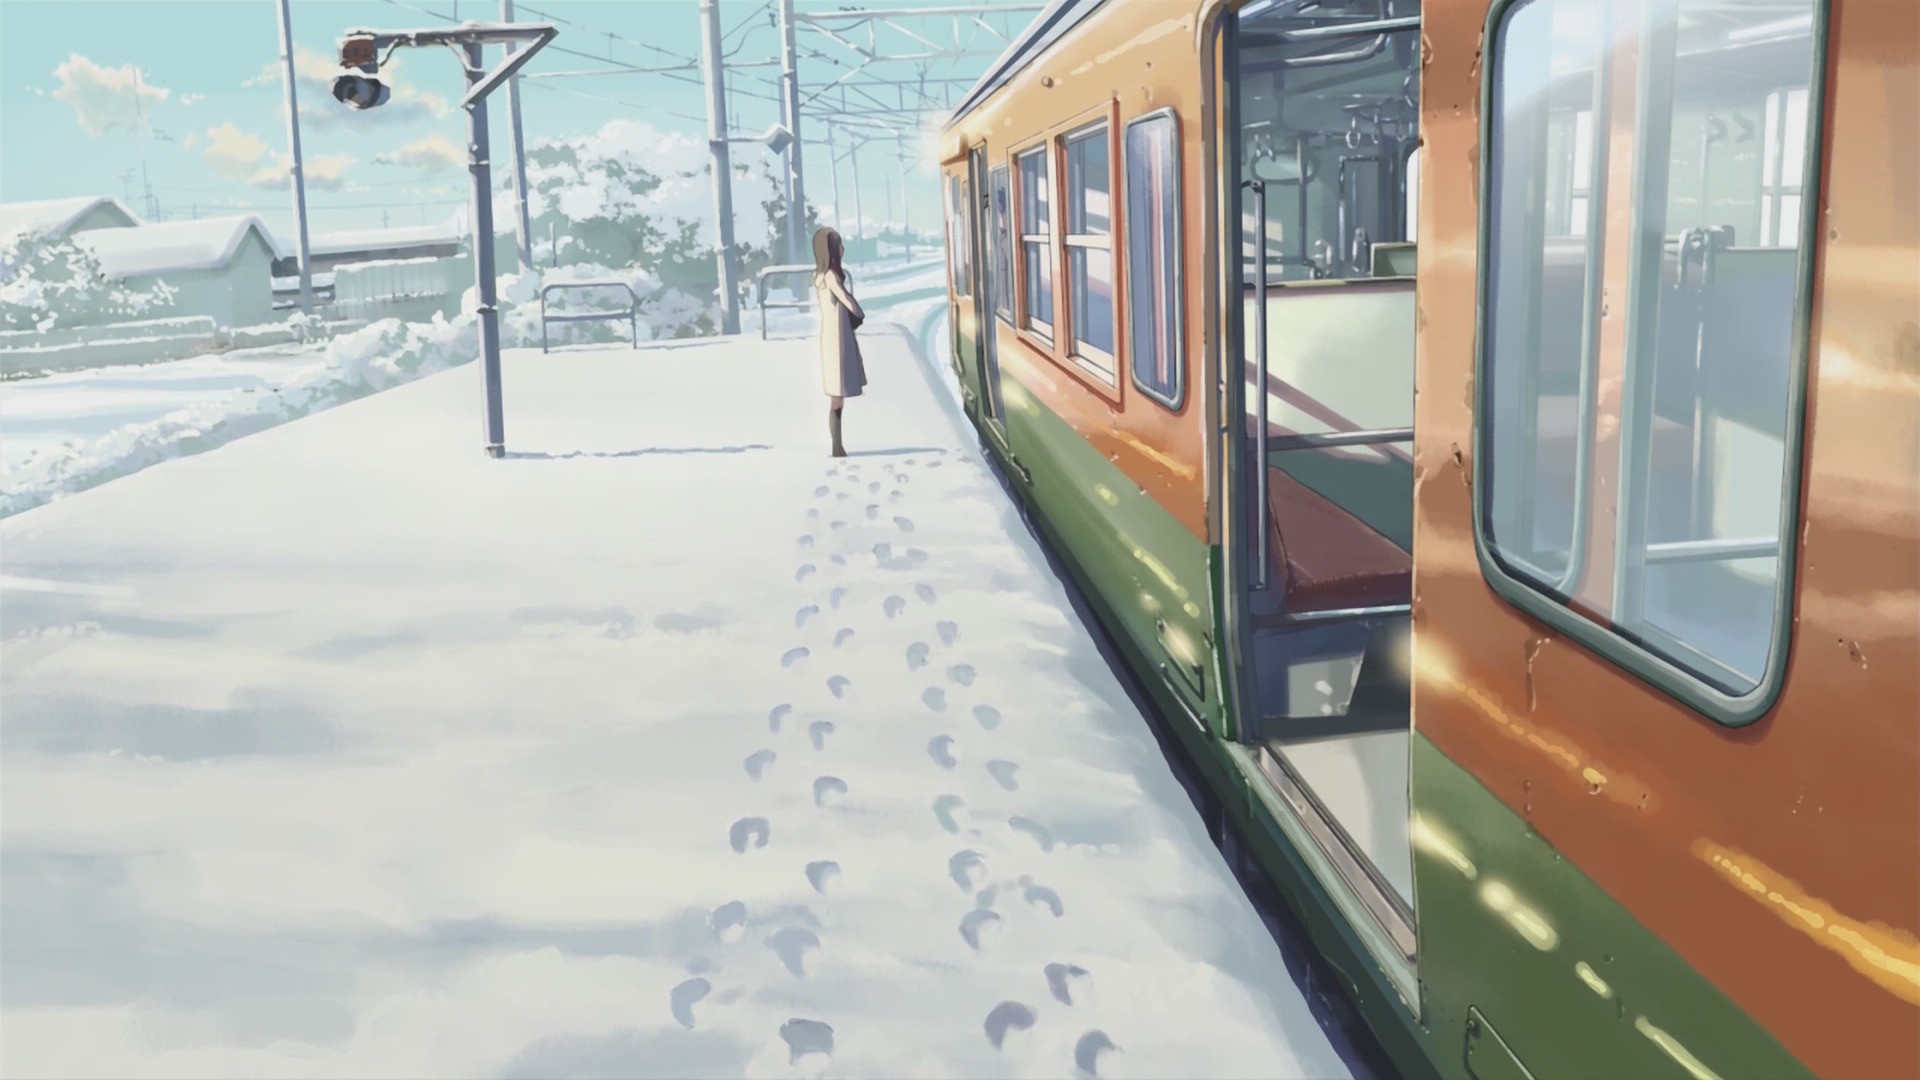 12 Anime Couple Train Wallpaper Orochi Wallpaper A whole ton of train station hd wallpapers for ipad: 12 anime couple train wallpaper